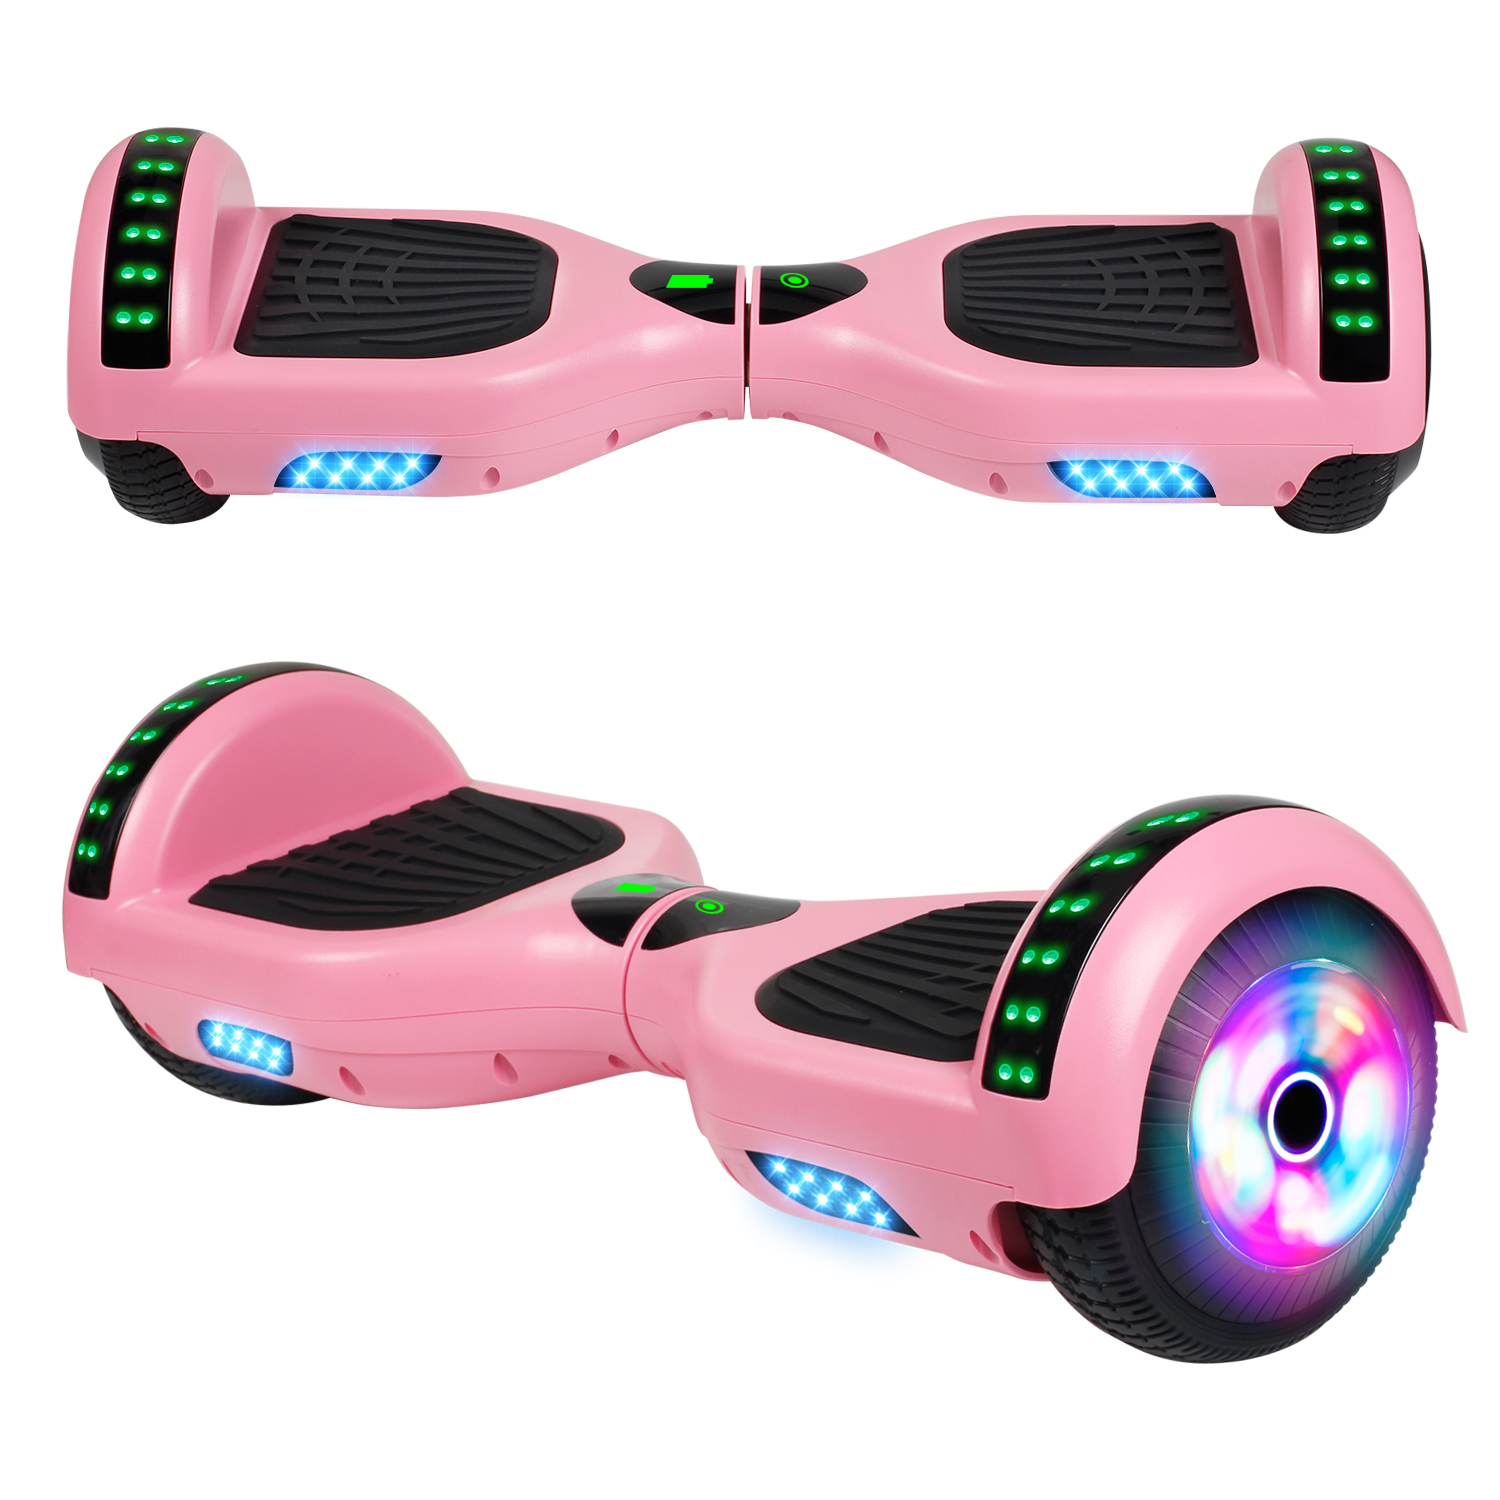 Self Balancing Electric Scooter Hoverboards with Seat Attachment & Bluetooth Speaker 6.5 Hover Board Scooter with Colorful LED Lights Gift for Kids and Adults Hoverboard and go Kart 